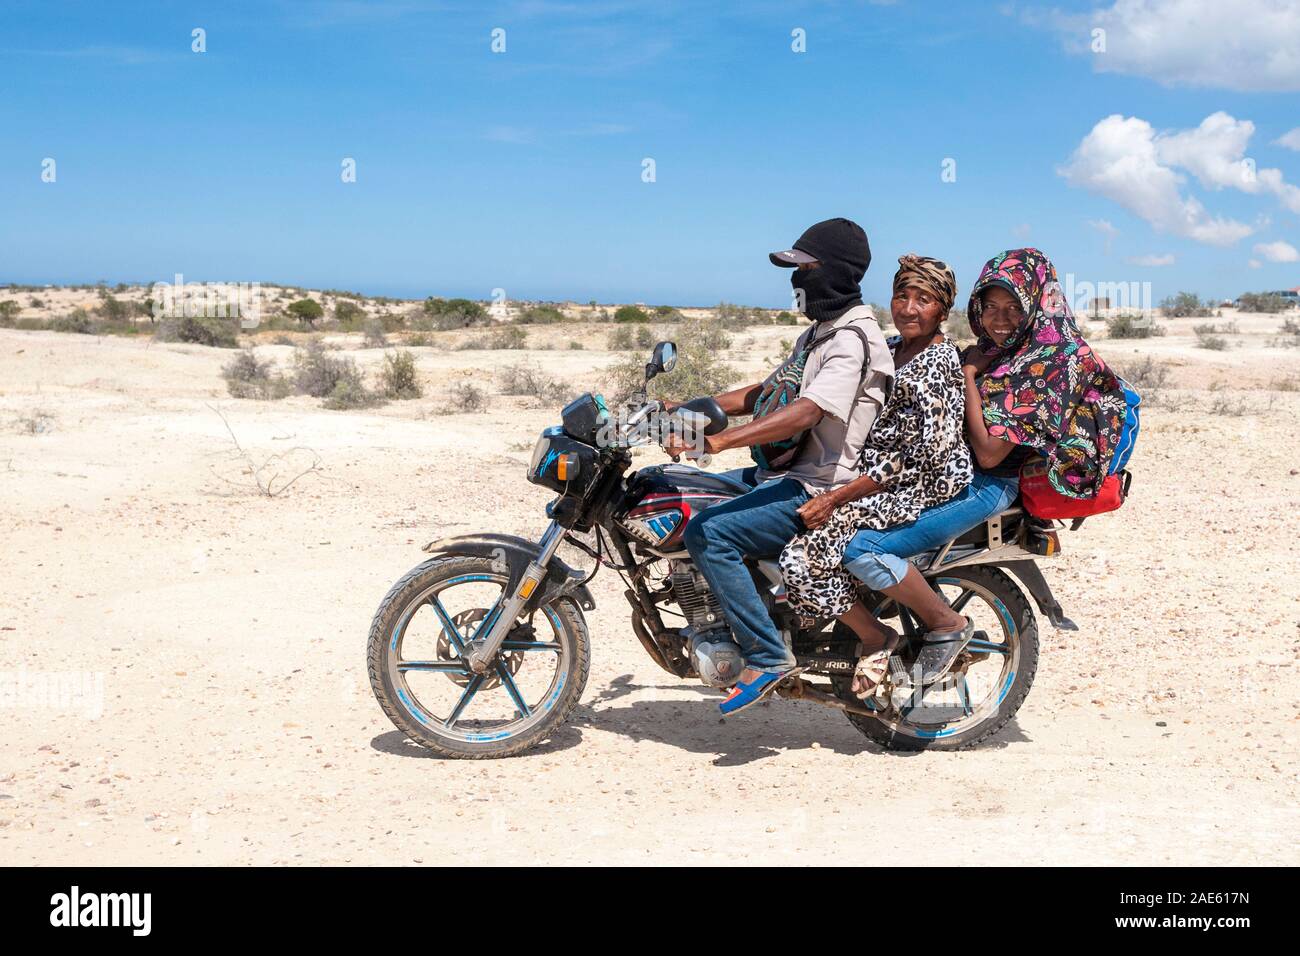 Indigenous Wayuu on a motorcycle in the Guajira peninsula of northern Colombia. Stock Photo